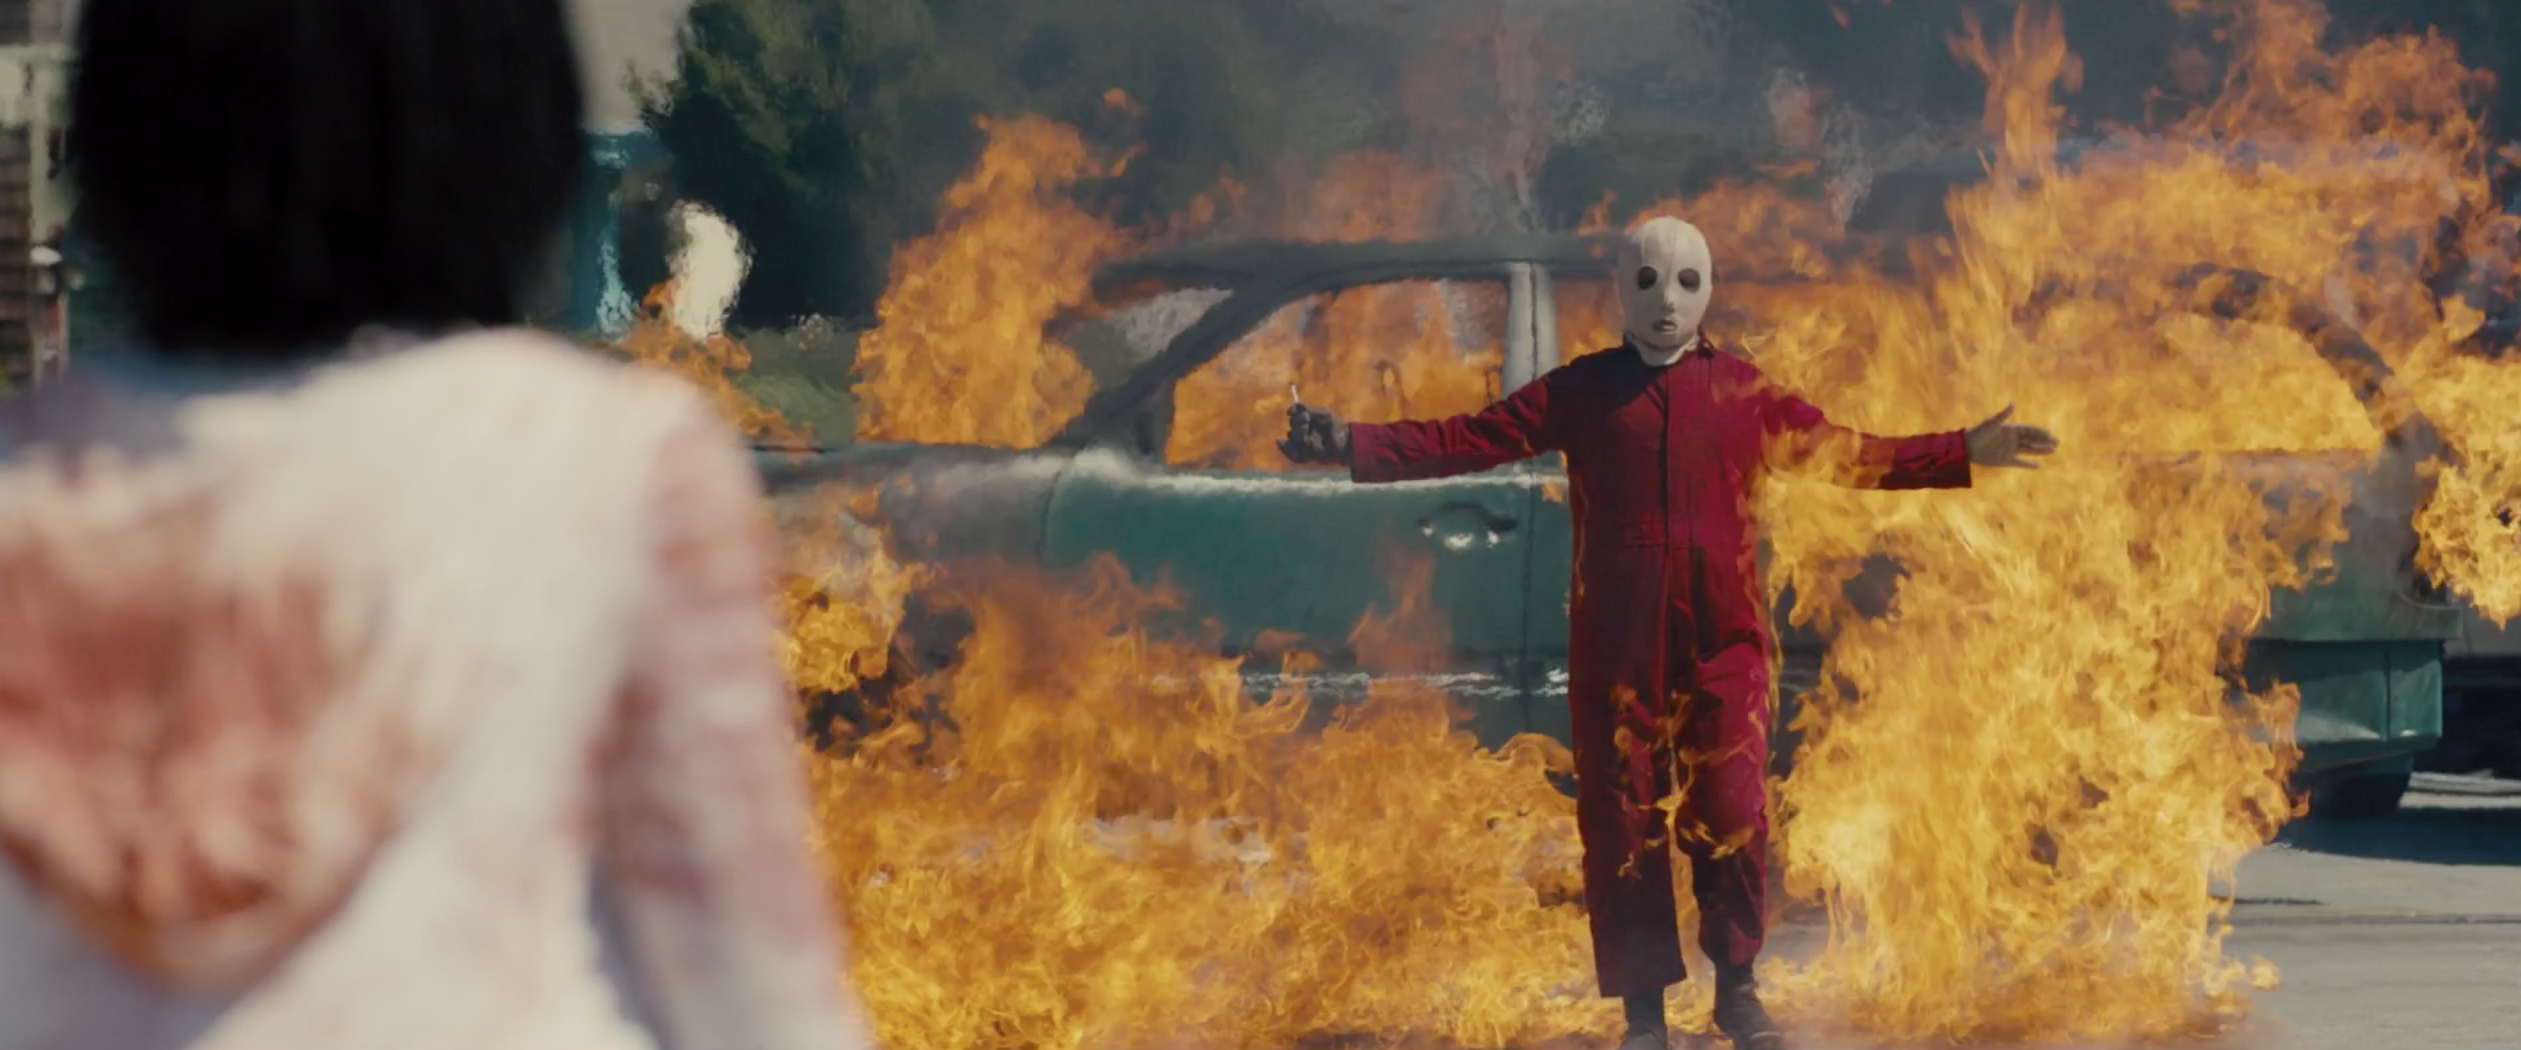 Screenshot of one of the doppelgangers standing in front of a burning car